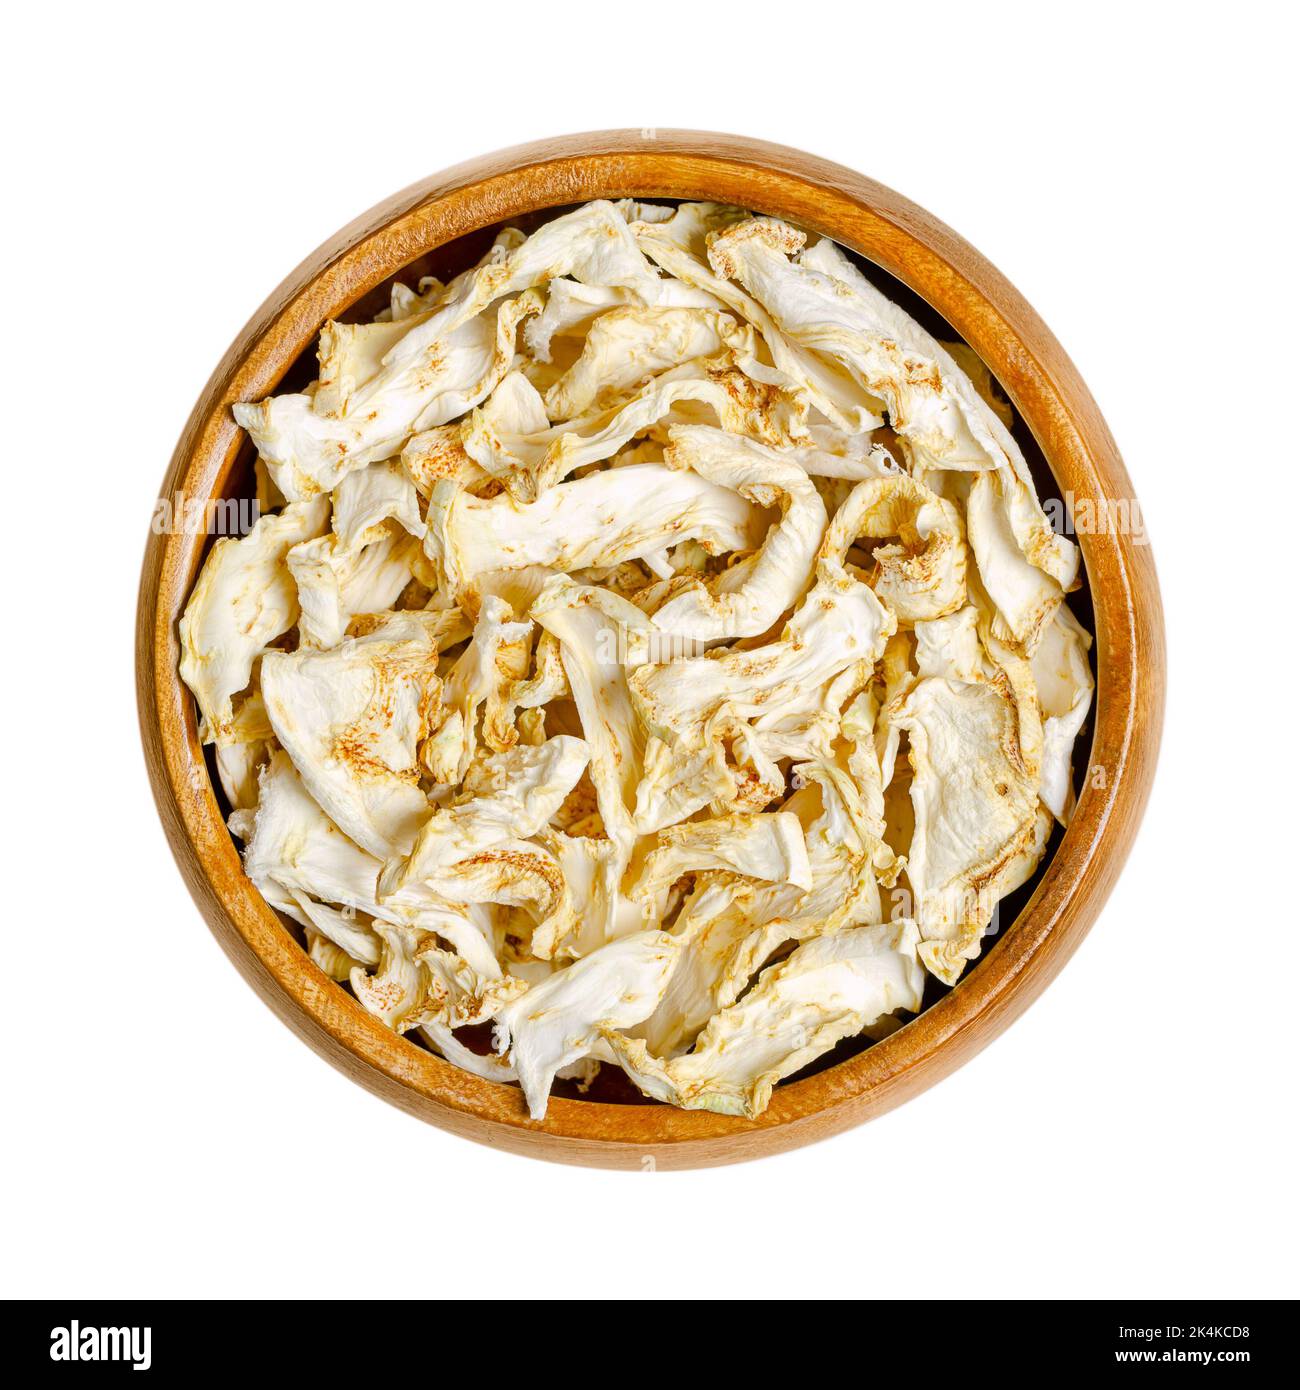 Celery root, dehydrated slices, in a wooden bowl. Celeriac, knob or turnip rooted celery, Apium graveolens var. rapaceum, a root vegetable. Stock Photo